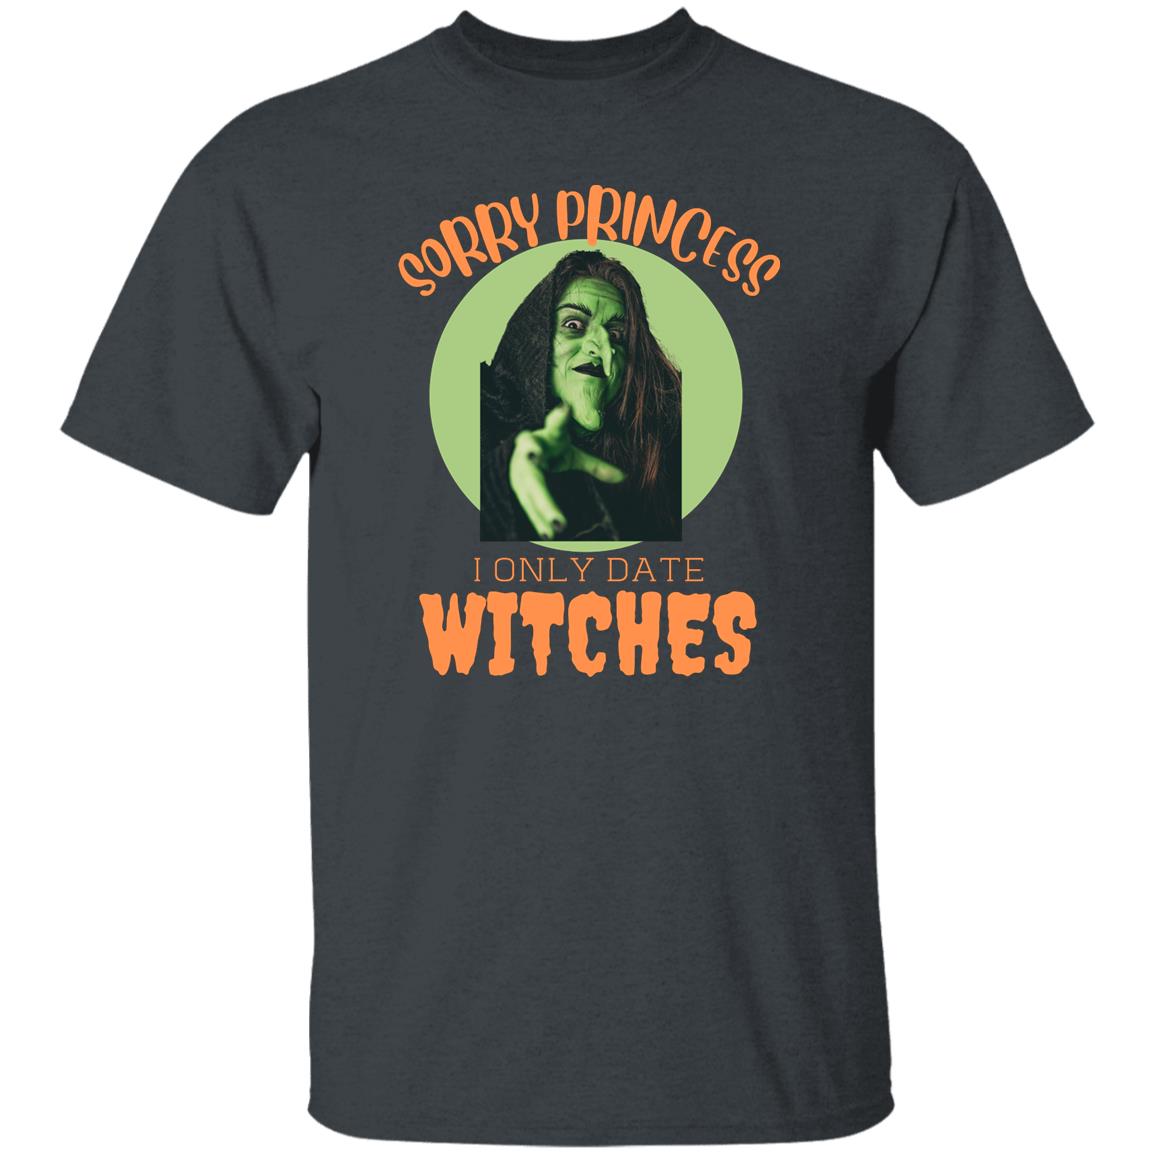 I Only Date Witches Funny Halloween Witch Girlfriend Spooky Dating Tee  T-Shirt